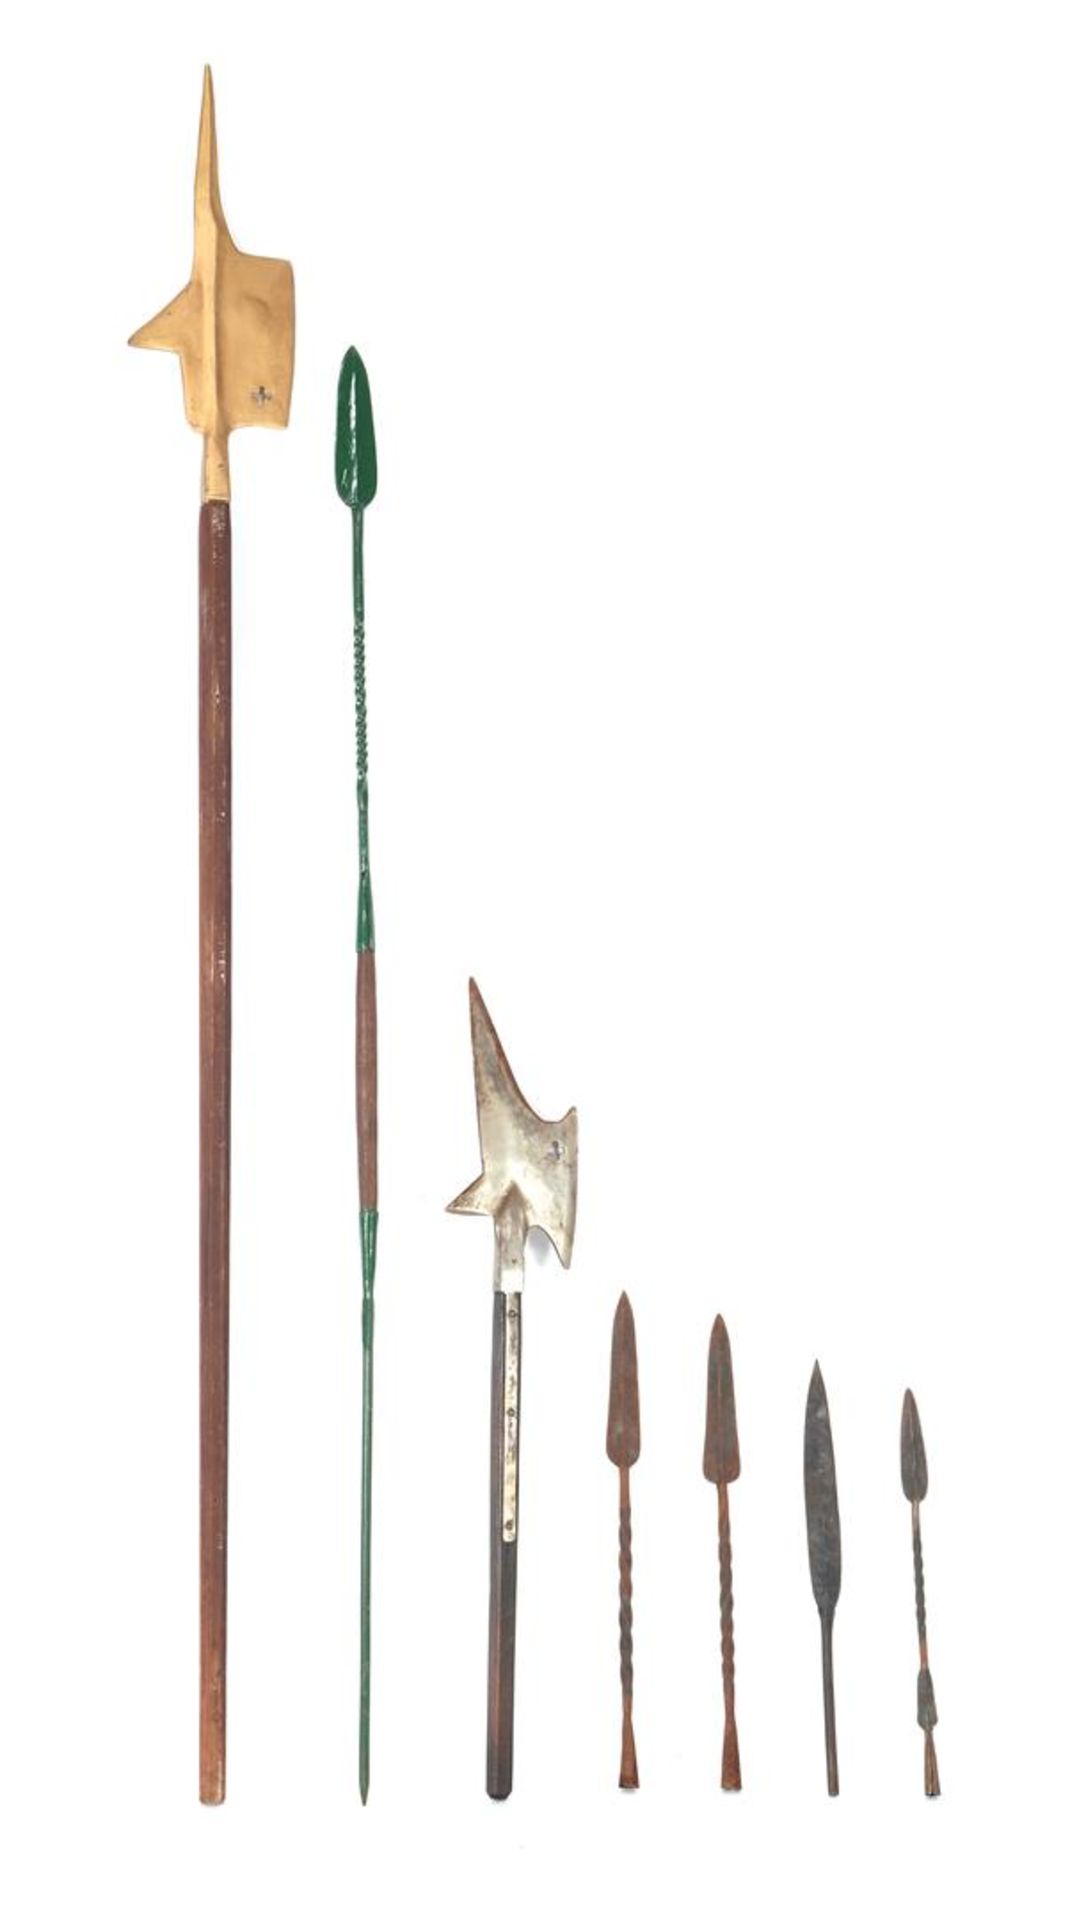 2 halberds, iron spear, and 4 iron spearheads